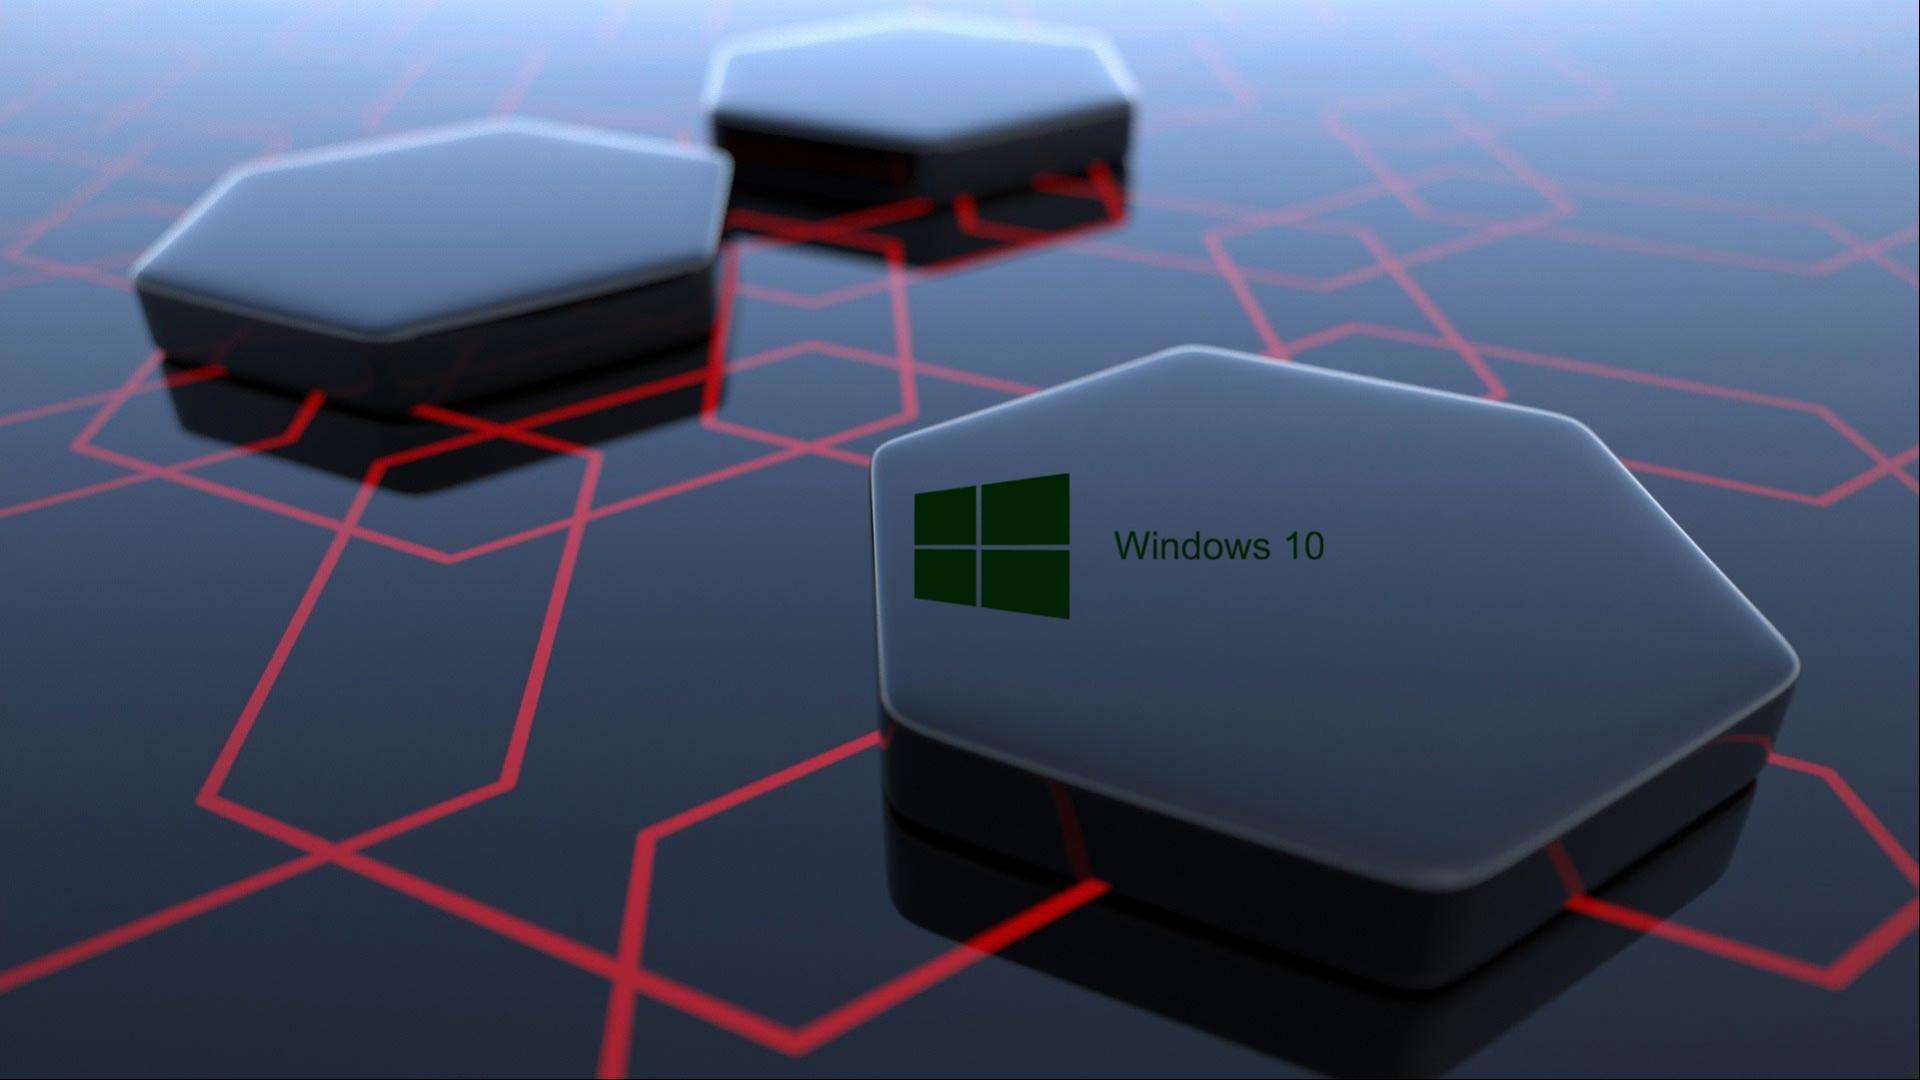 24+ Stunning Windows 10 Wallpapers HD For Your Desktop